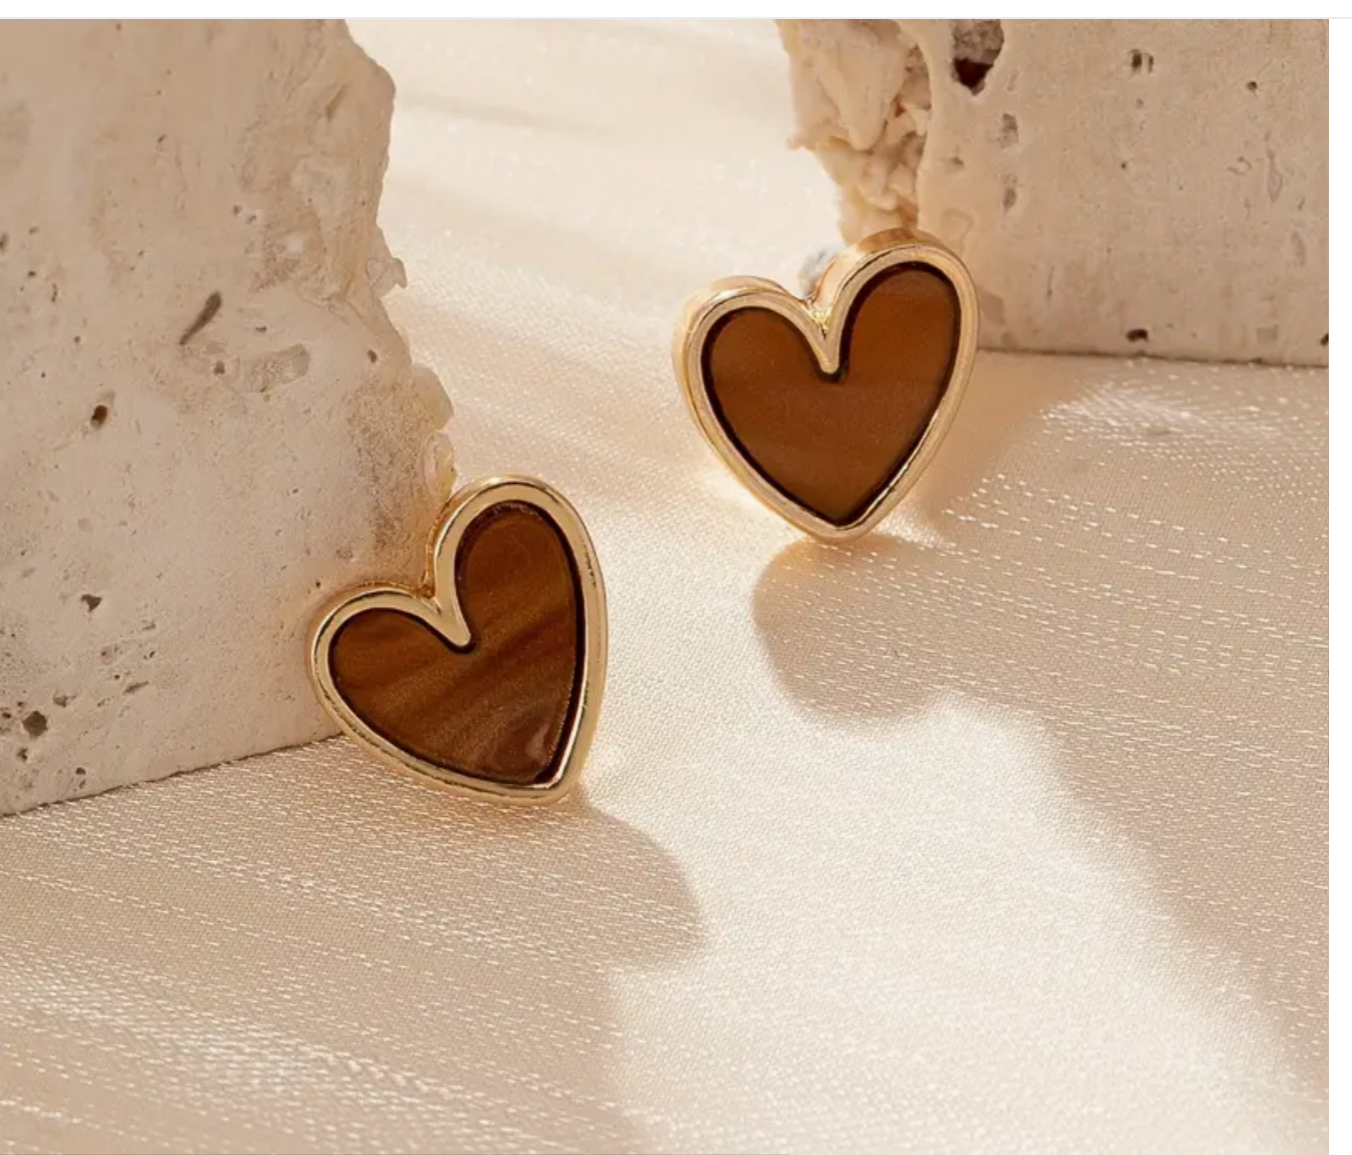 Dainty Love: Mini Heart-Shaped Stud Earrings in 14K Gold - Elegant Simplicity for Timeless Dating Style